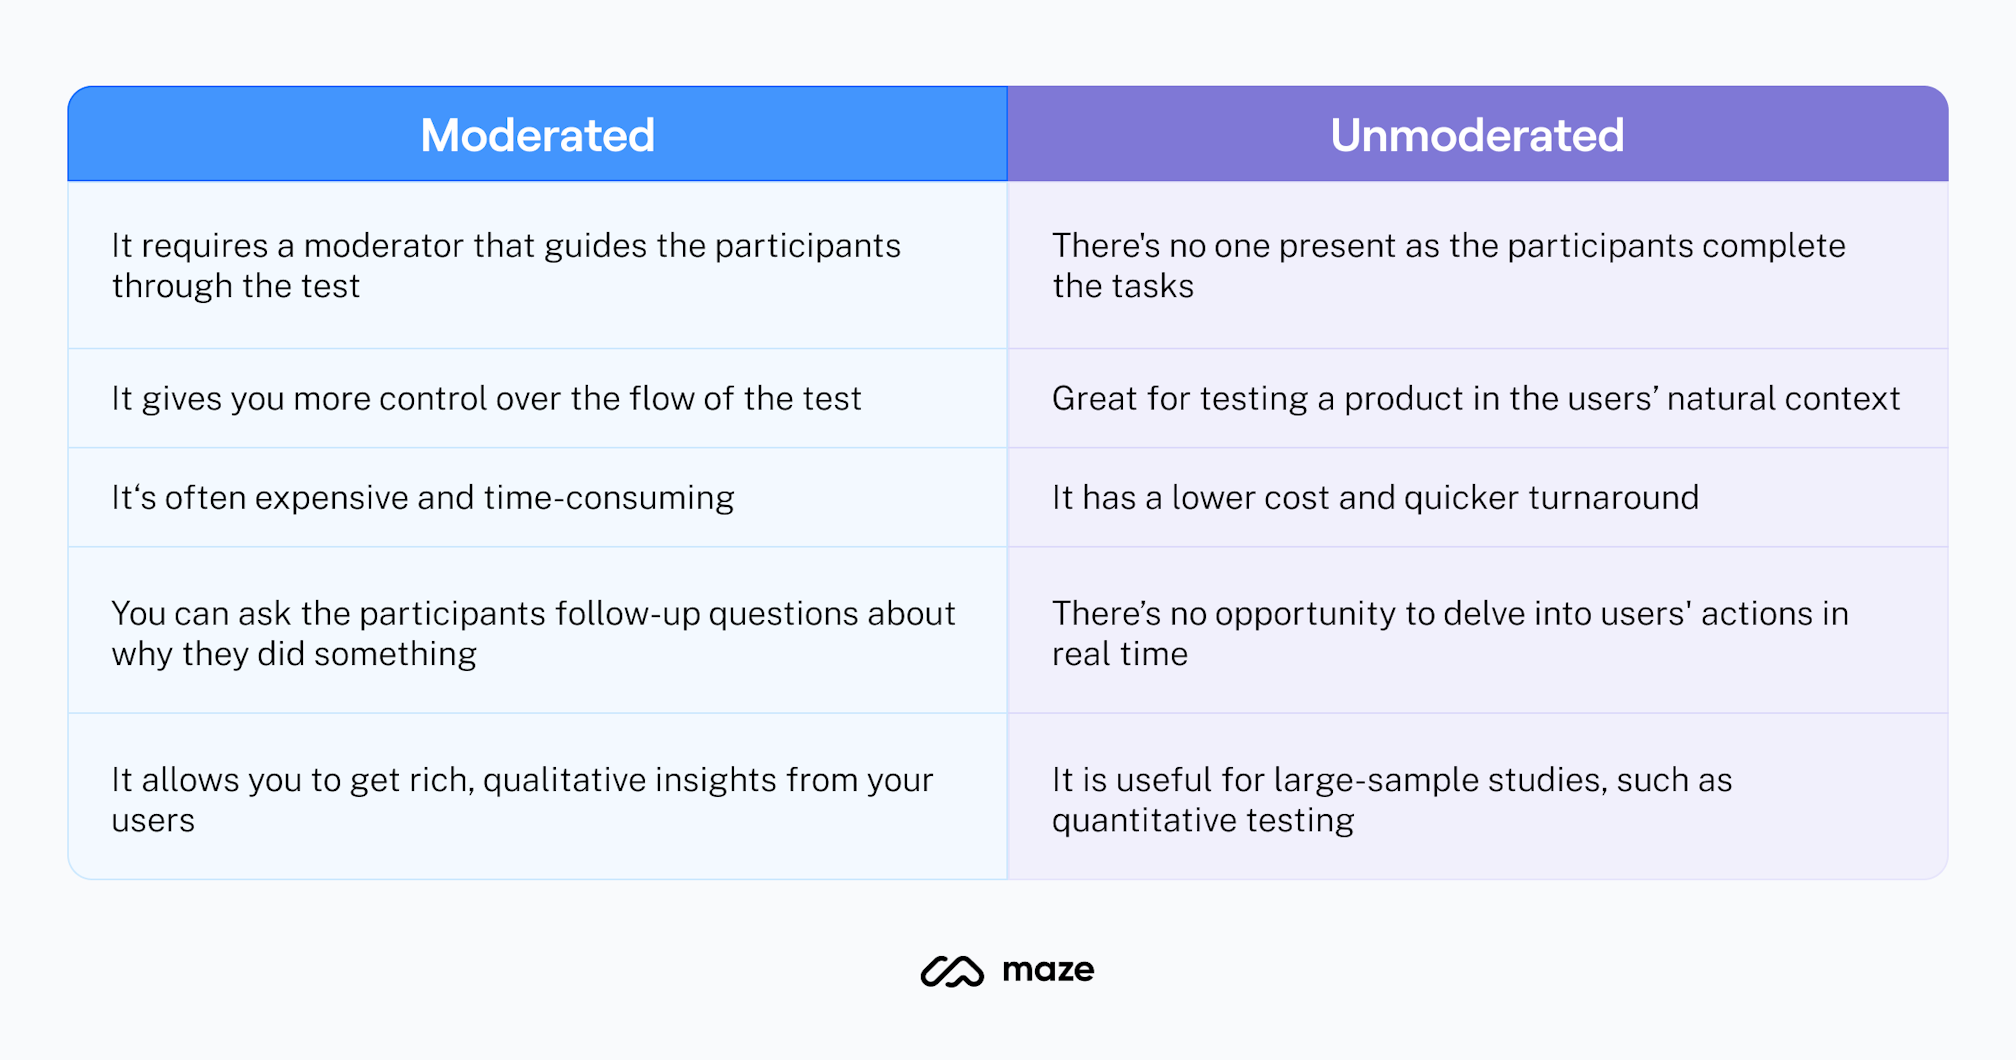 Table comparing the key characteristics of moderated vs. unmoderated testing approaches